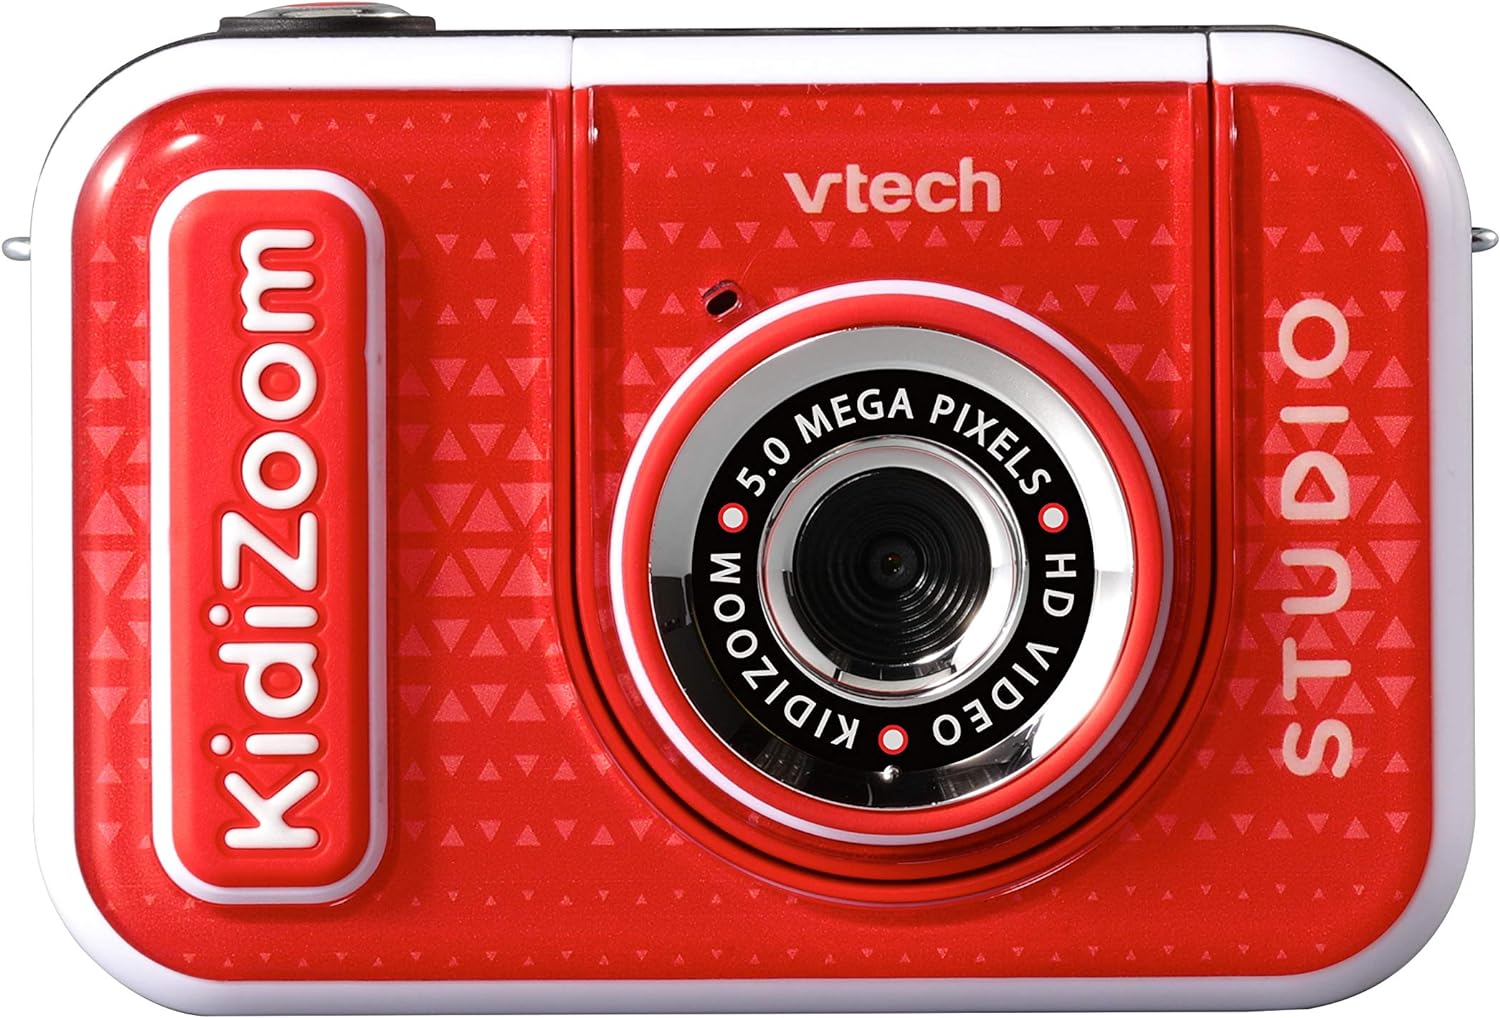 VTech KidiZoom Studio (Red), Video Camera for Children with Fun Games, Kids Camera with Special Effects, Kids Digital Camera with Rechargeable Battery, Action Camera for Boys and Girls from 5 Years +